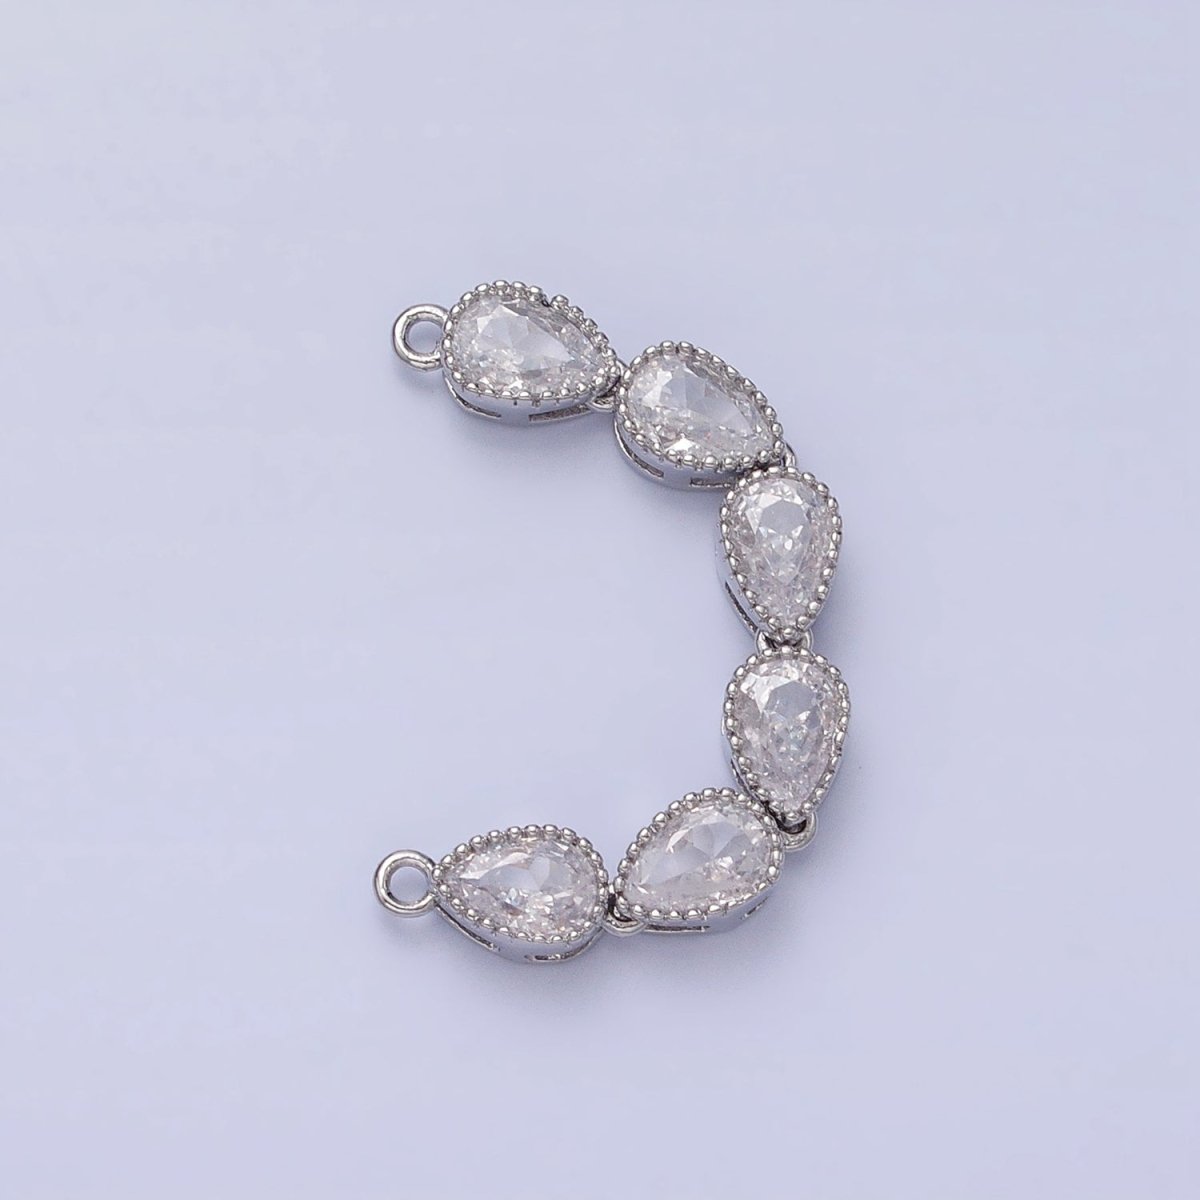 Bendable Gold Tear Drop Long Bar Connector, CZ Micro Pave Silver Teardrop Link Connector Necklace Jewelry Making AA-854 AA-920 - DLUXCA